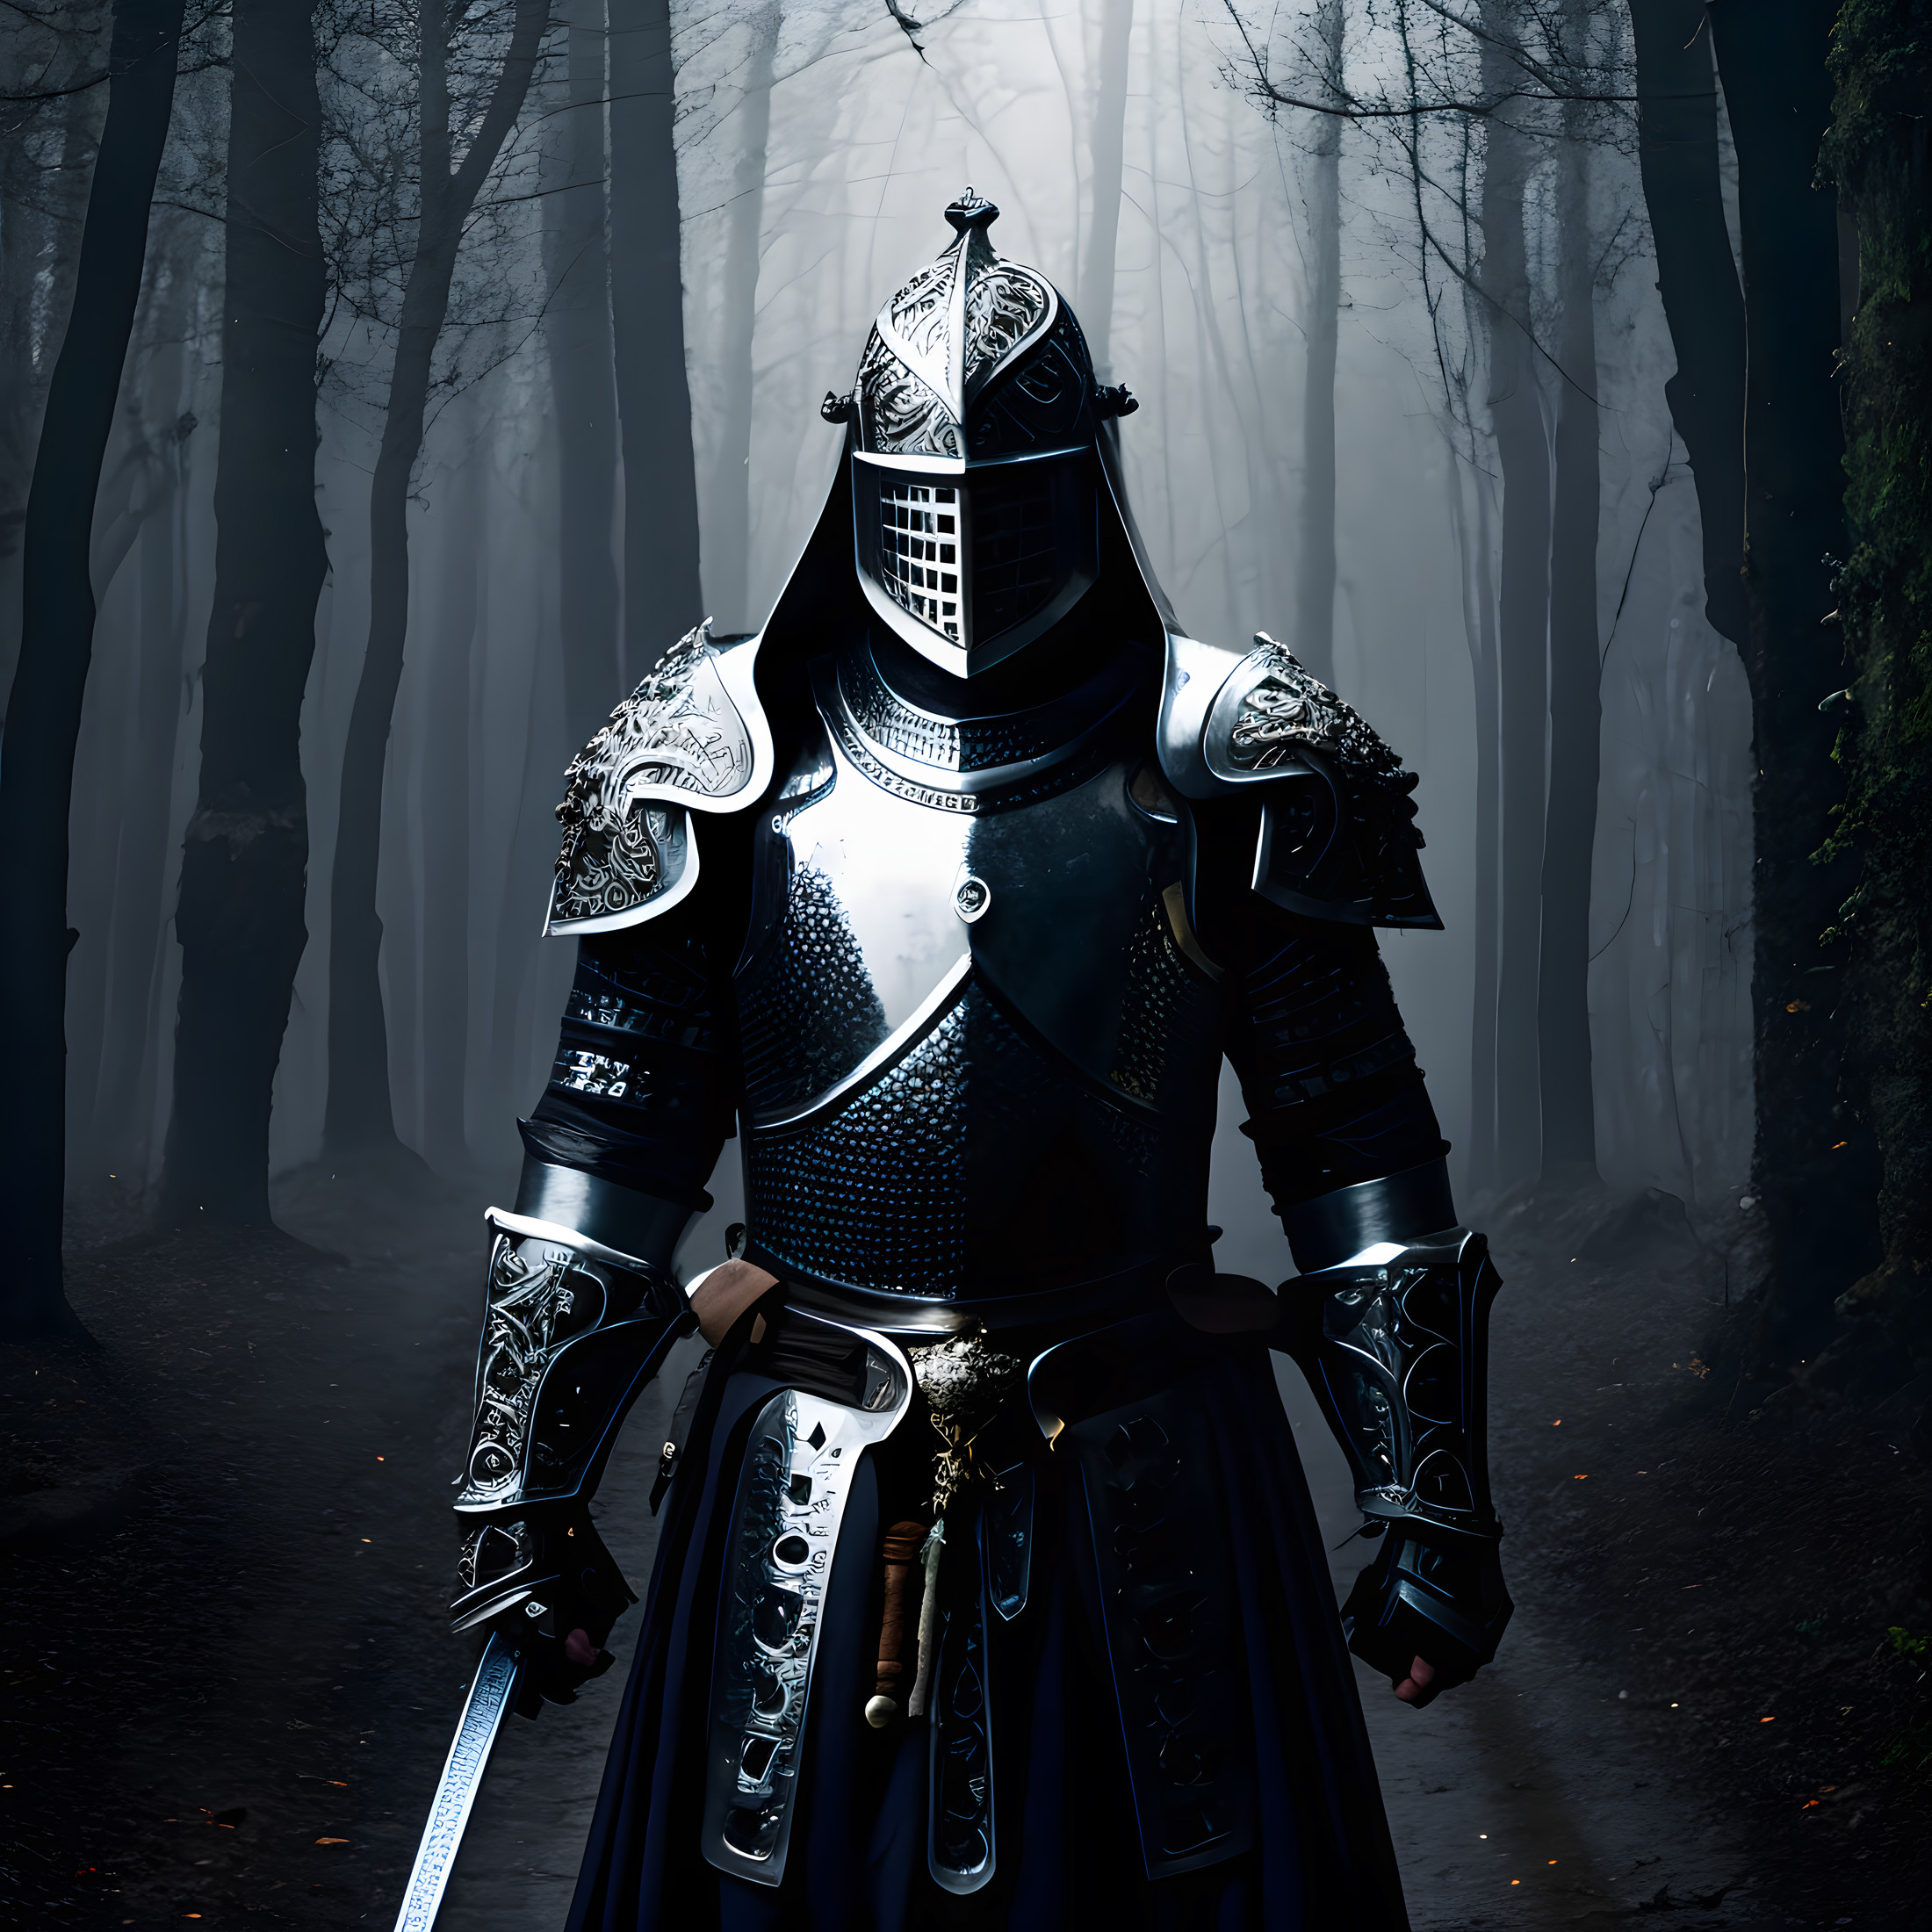 8k uhd, sharp focus, masterpiece, RAW photo, high quality, highres,
Knight,Armour made of crystal glass + large sword, mag...